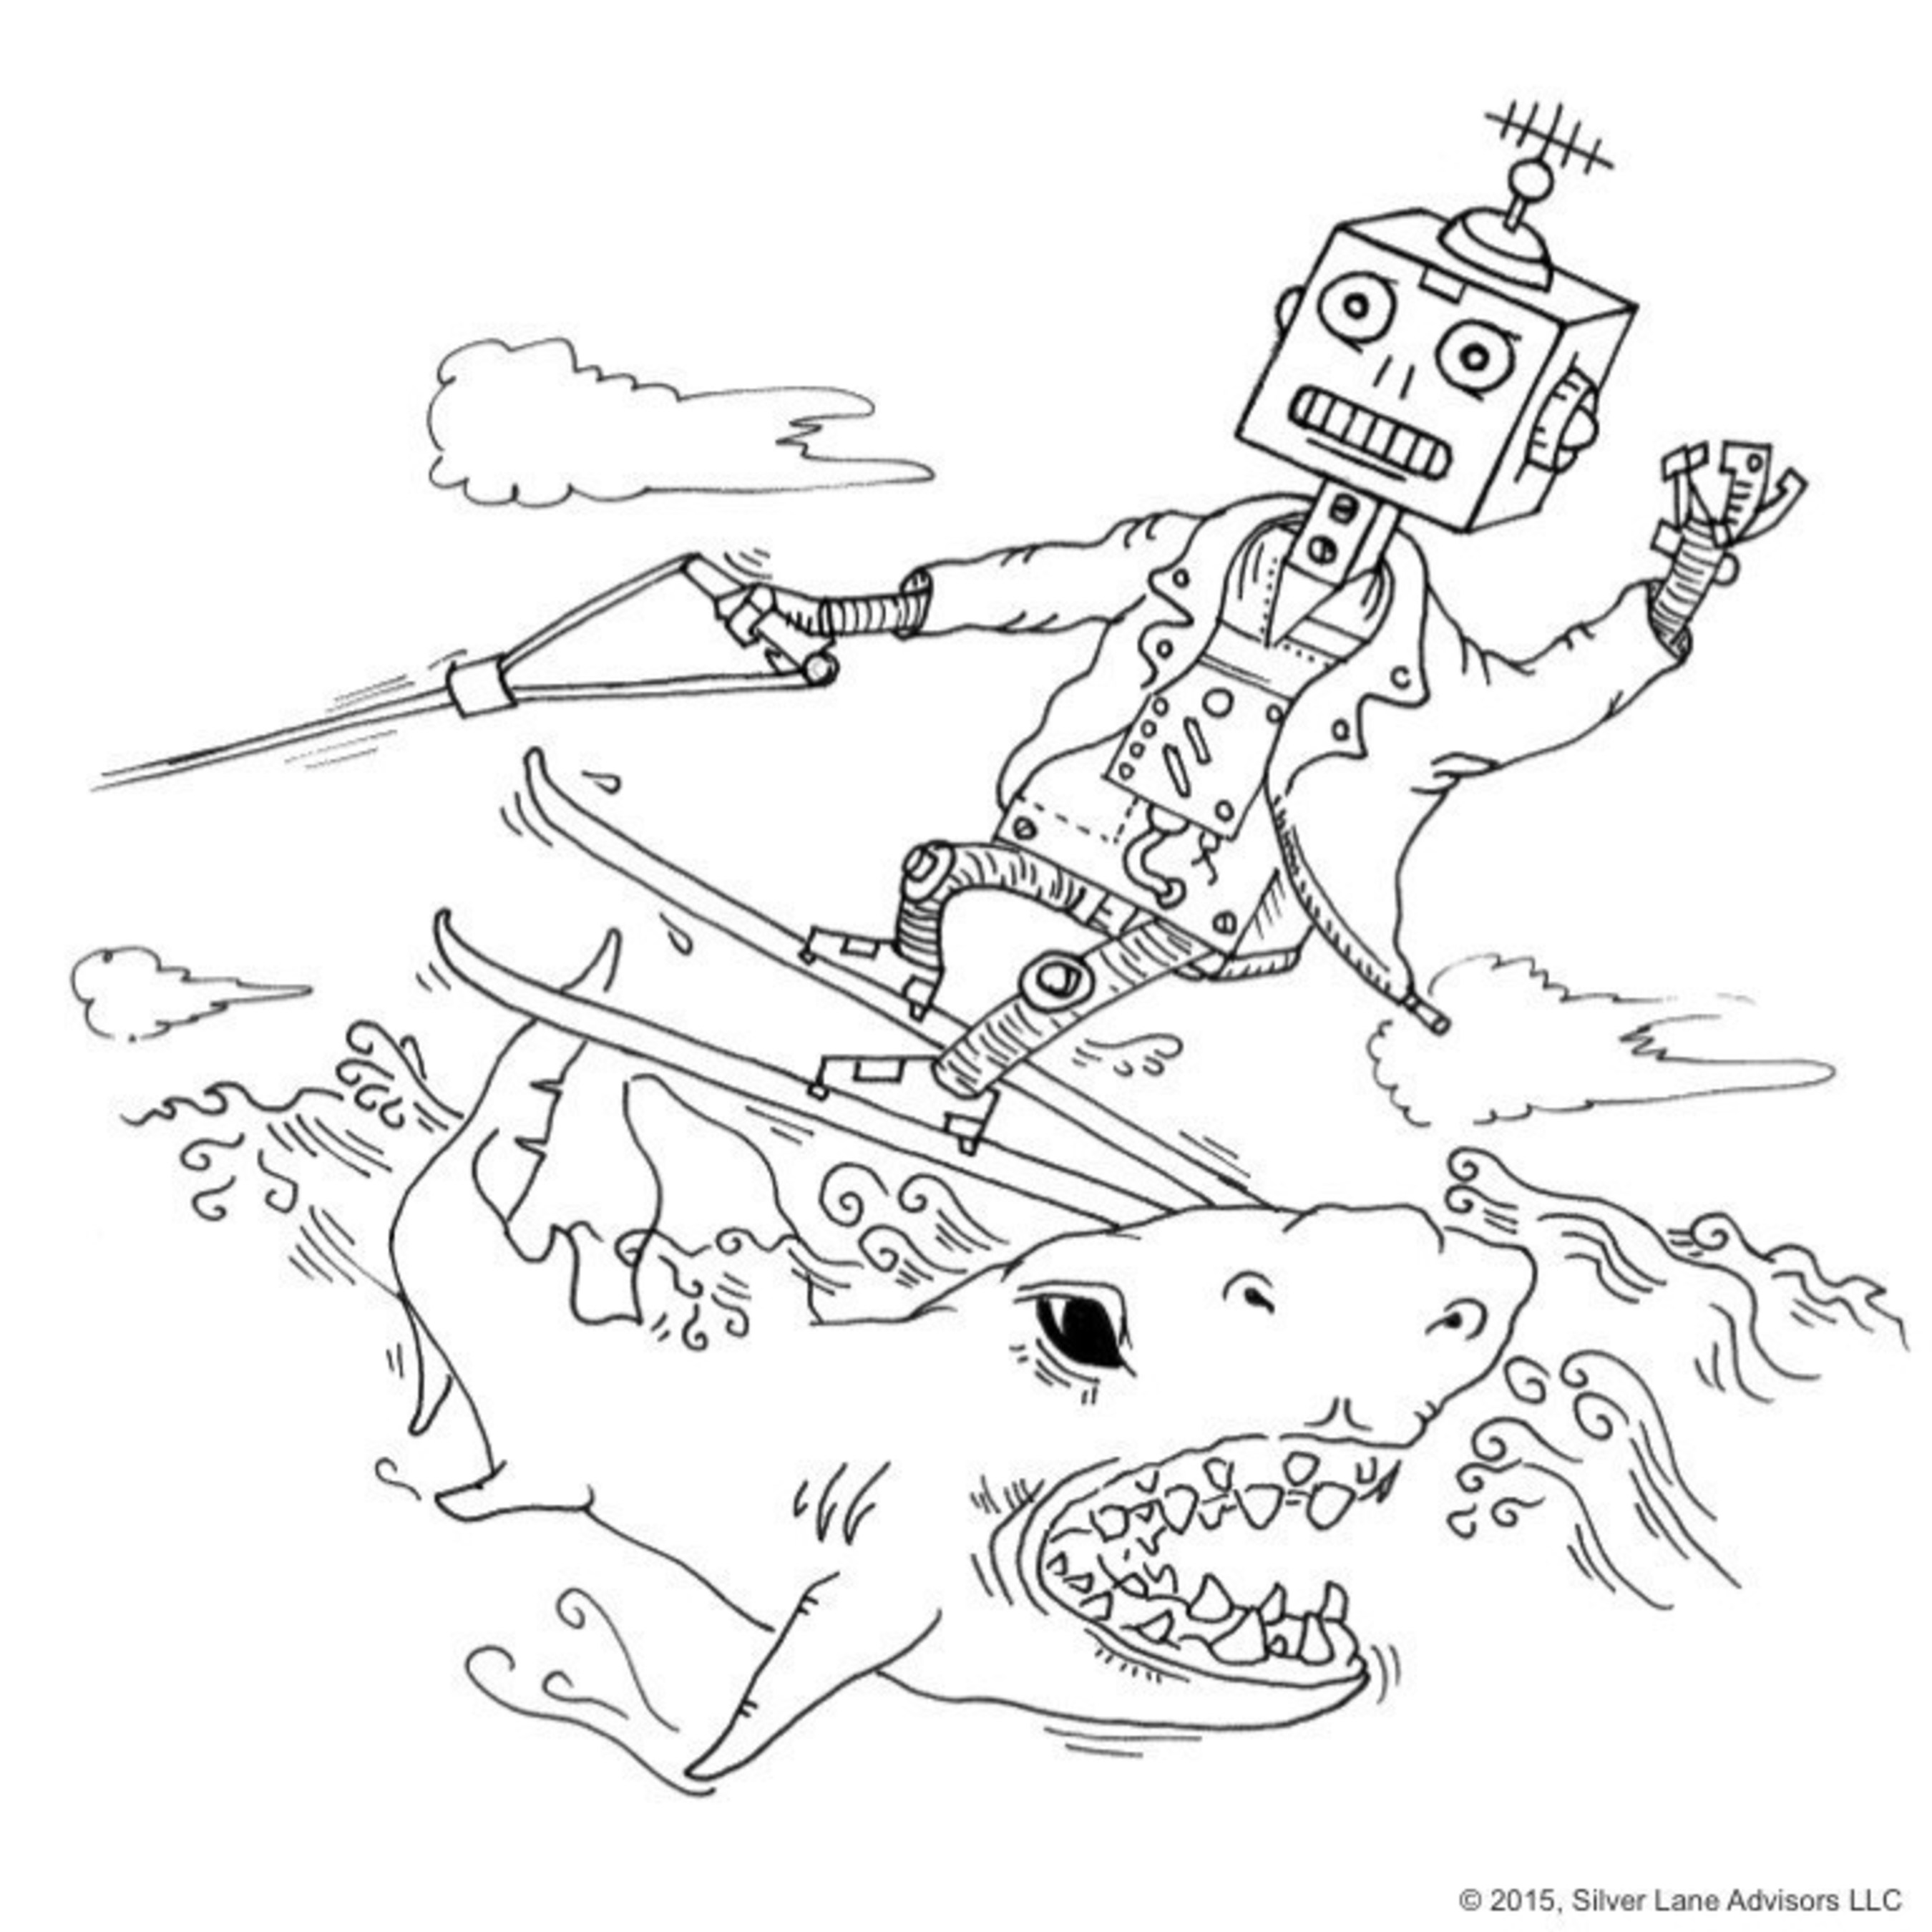 Have Roboadvisors "Jumped the Shark?" -- Six Predictions from Silver Lane